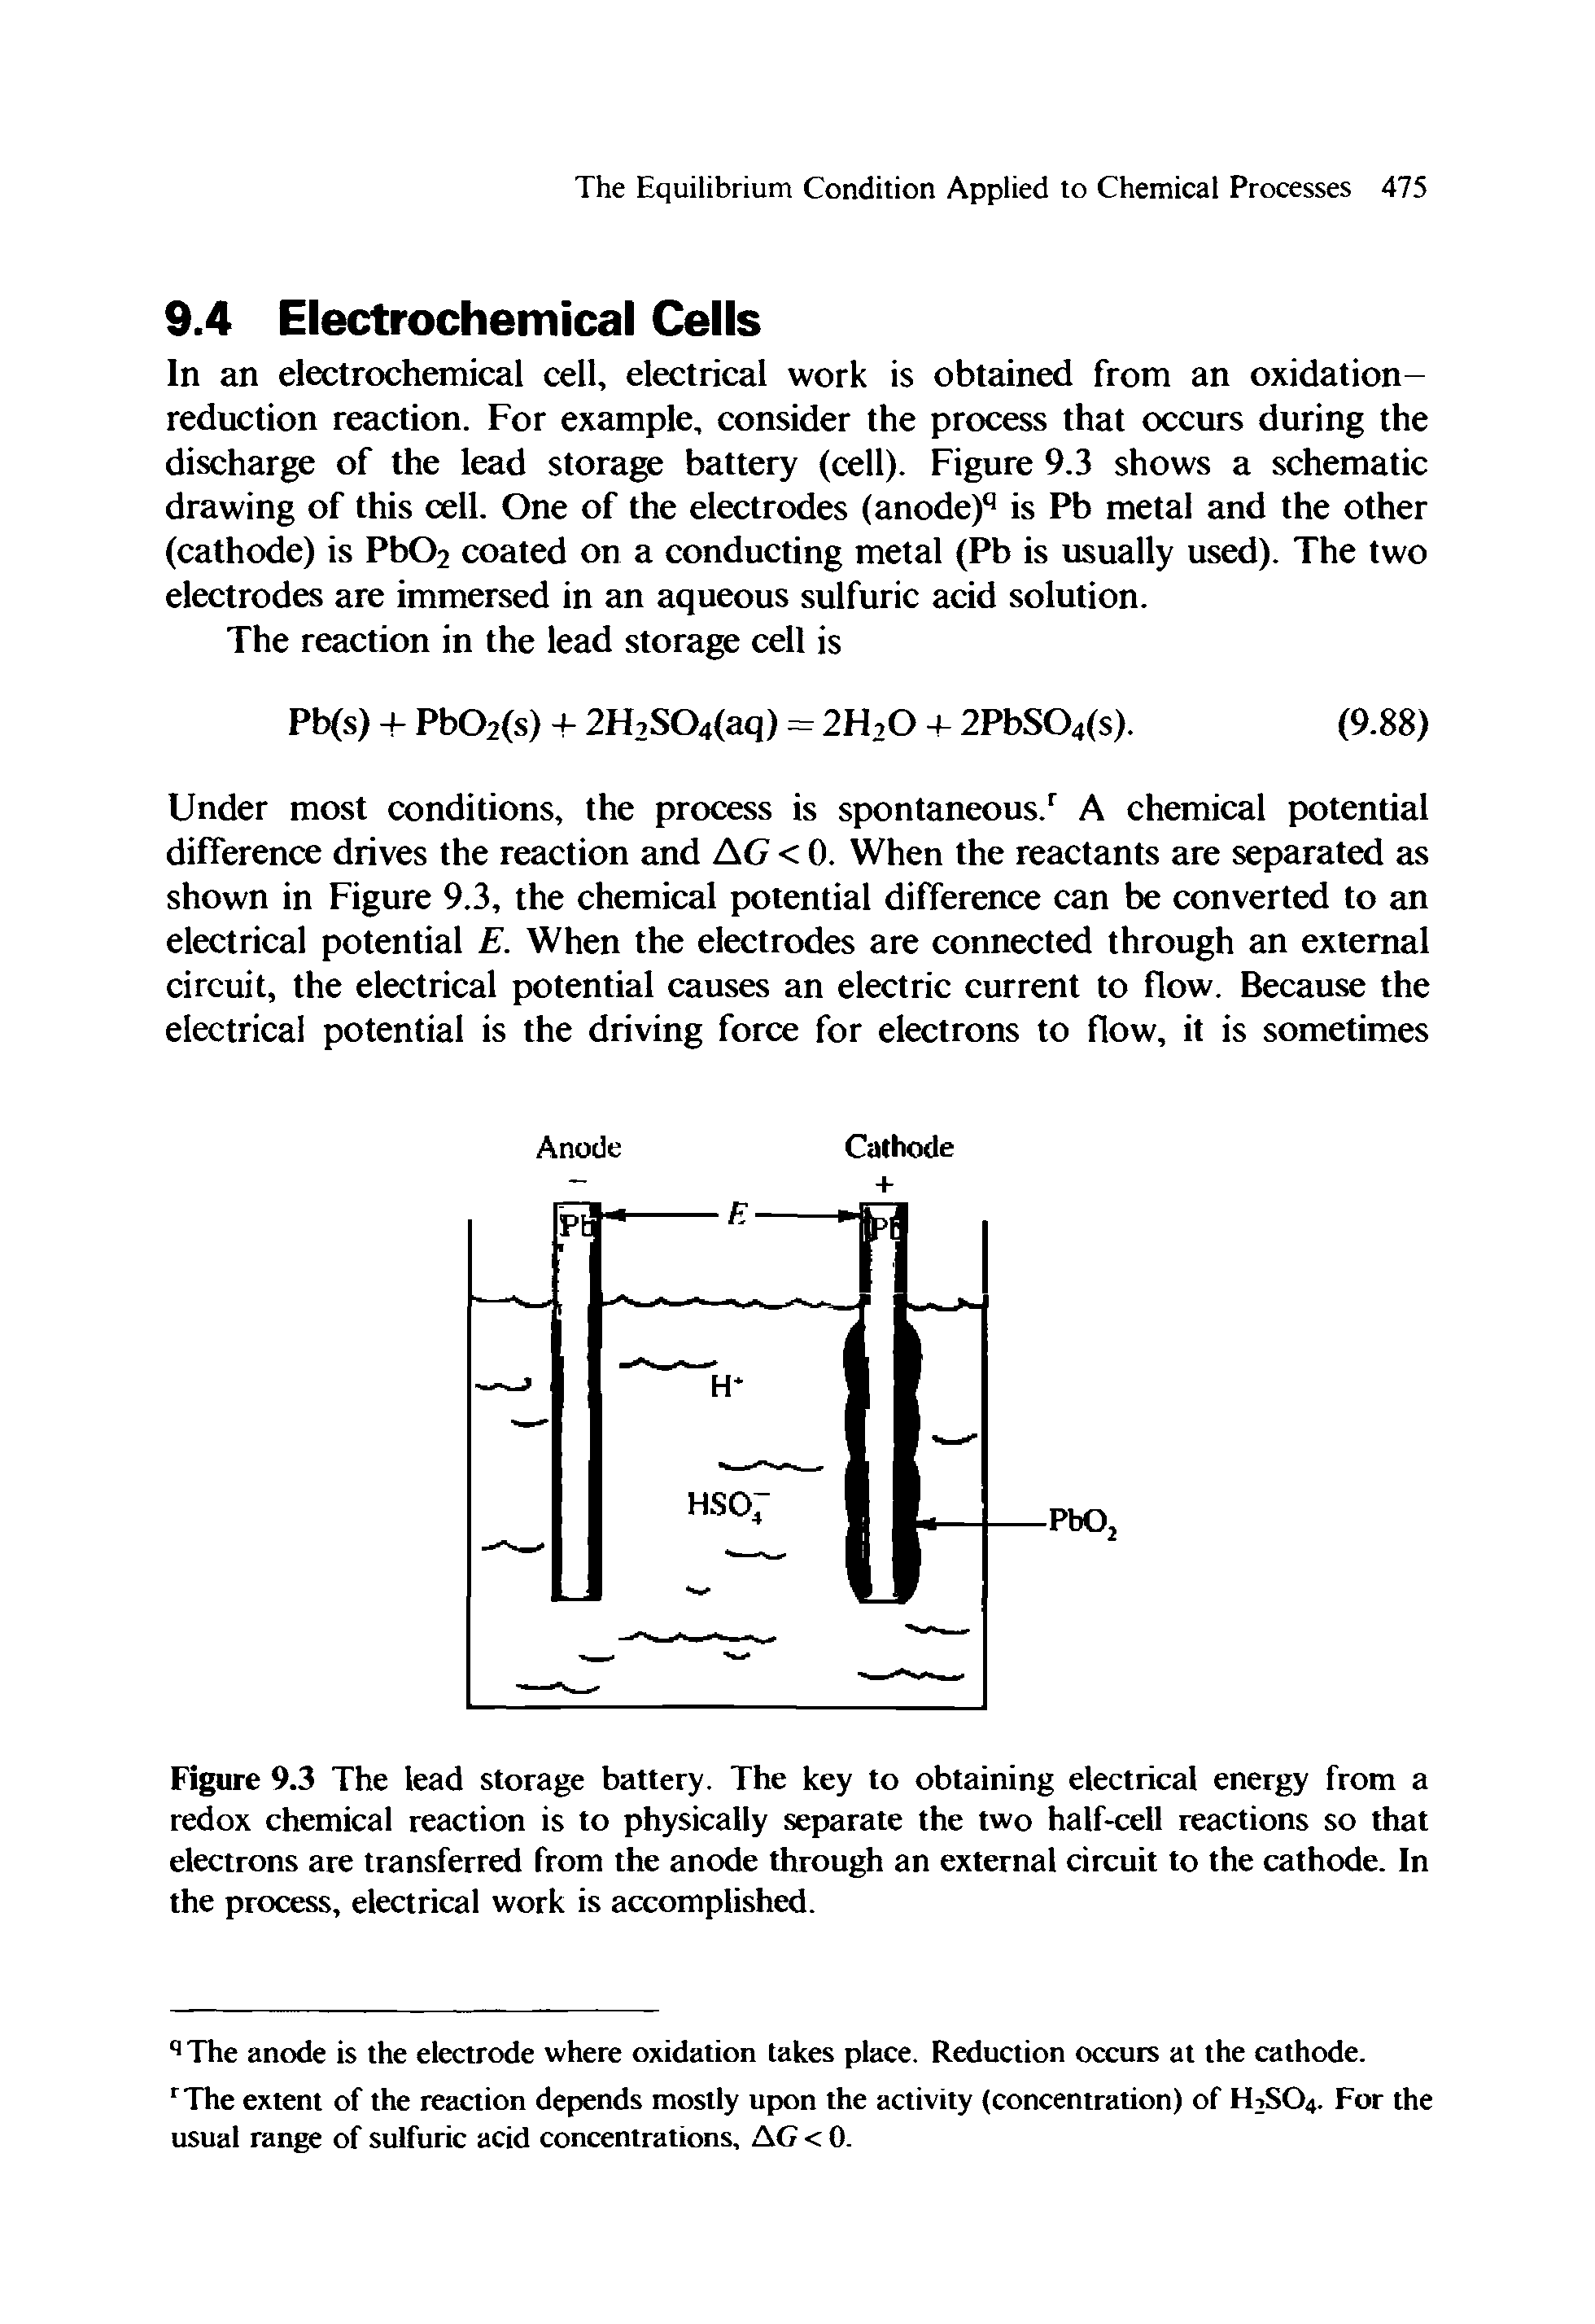 Figure 9.3 The lead storage battery. The key to obtaining electrical energy from a redox chemical reaction is to physically separate the two half-cell reactions so that electrons are transferred from the anode through an external circuit to the cathode. In the process, electrical work is accomplished.